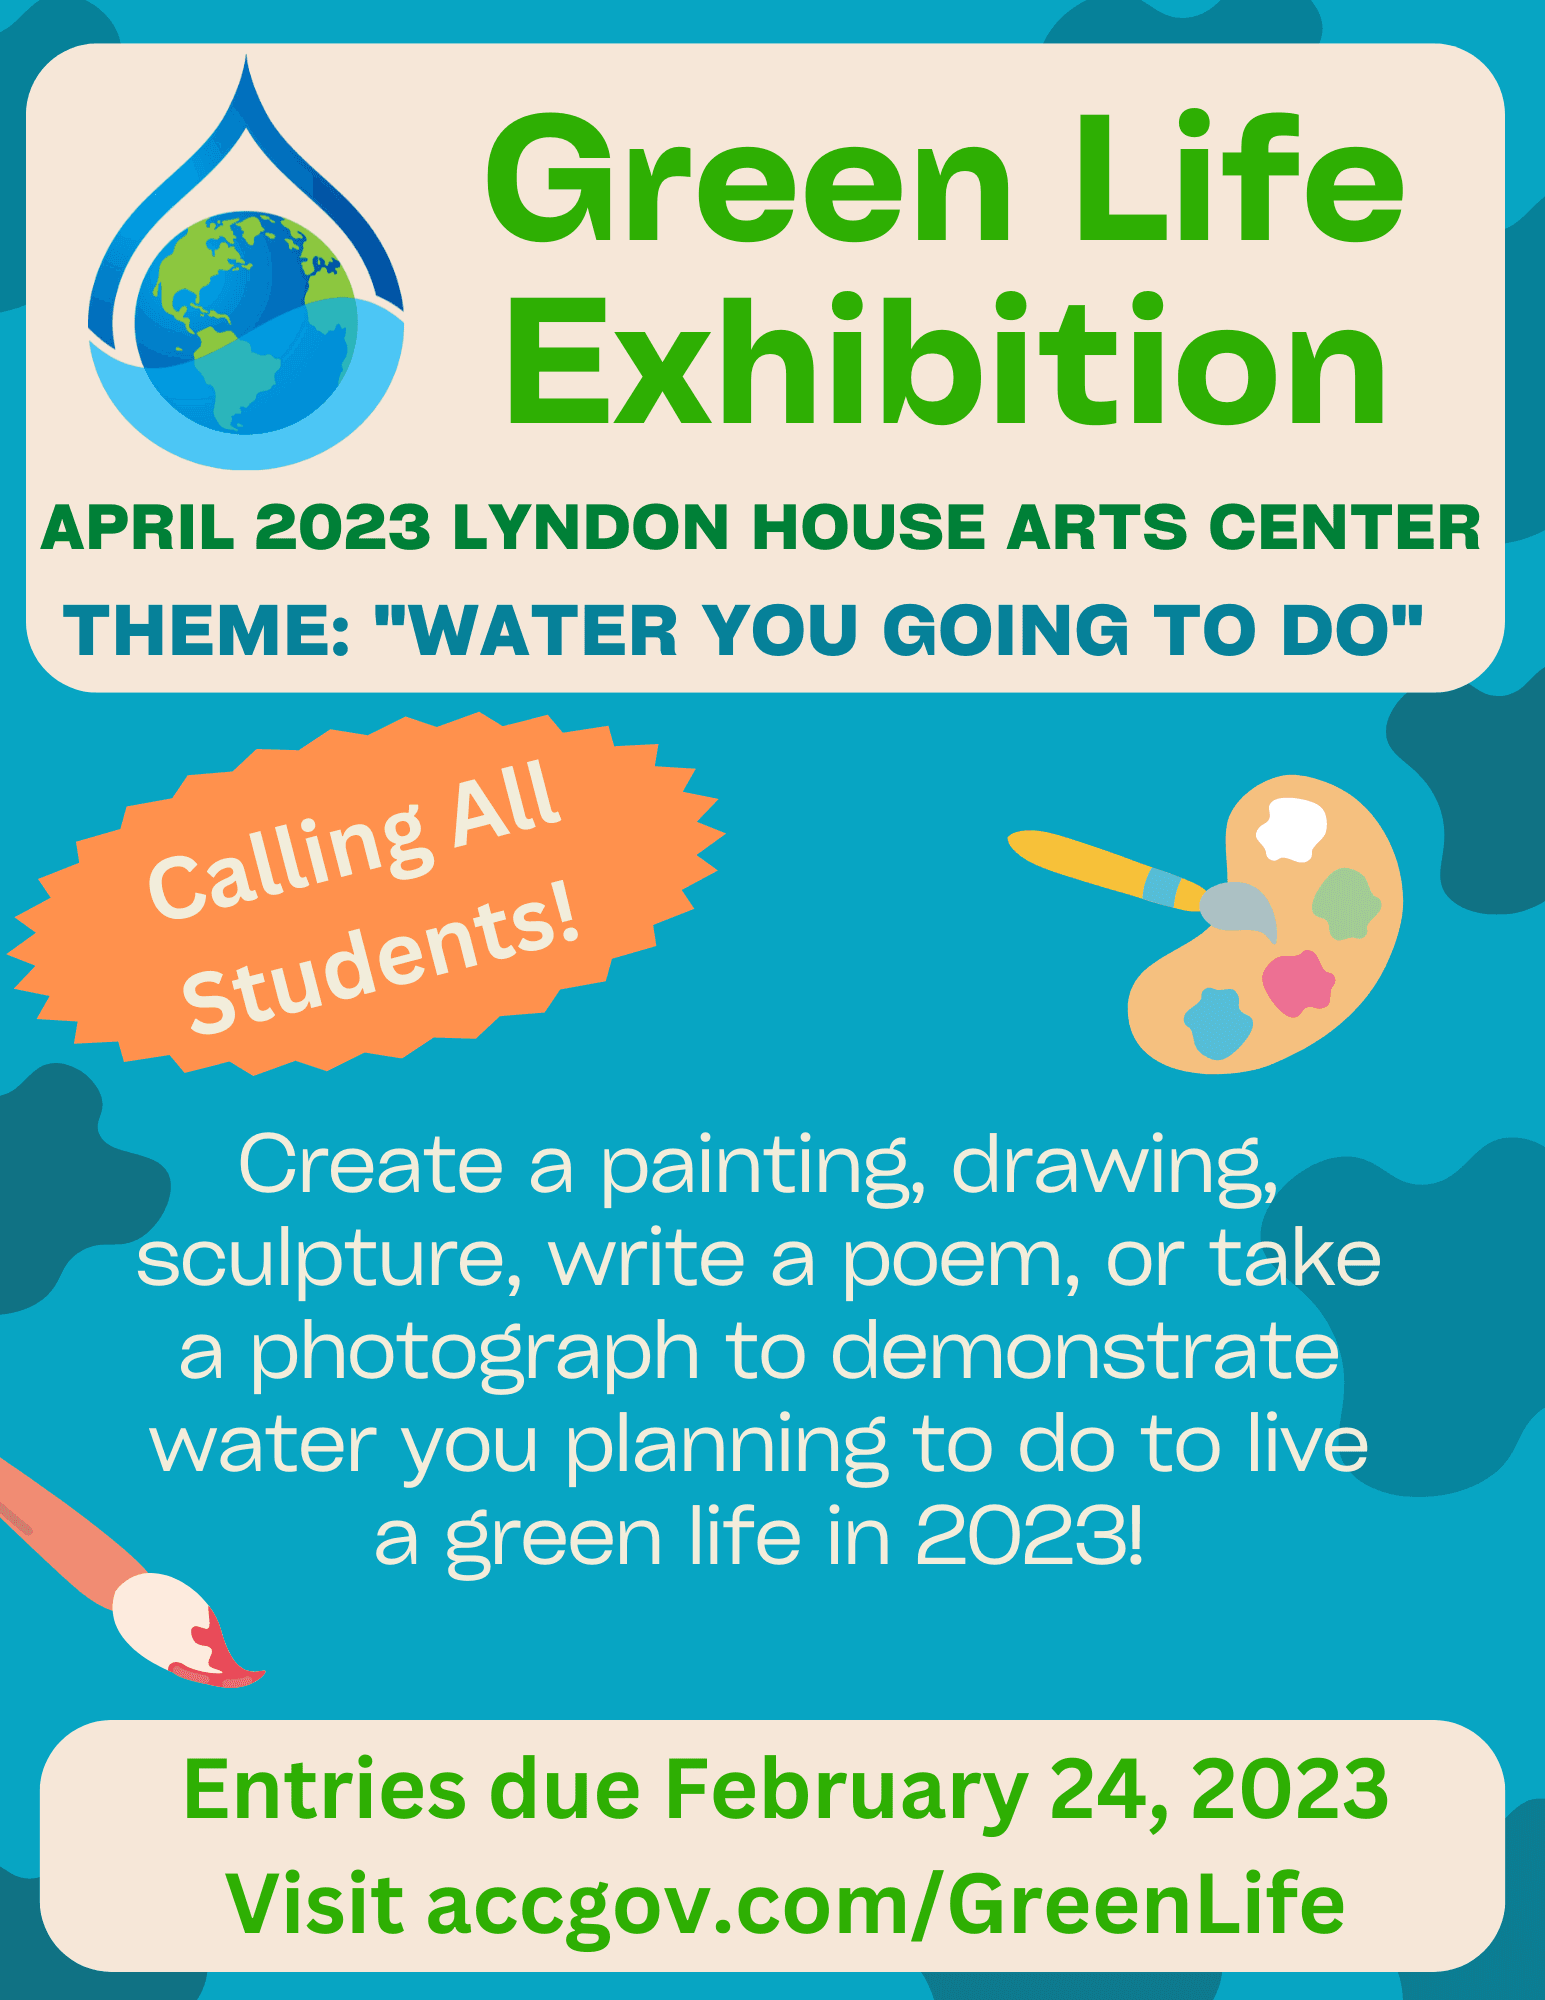 Green Life Exhibition Contest for Students